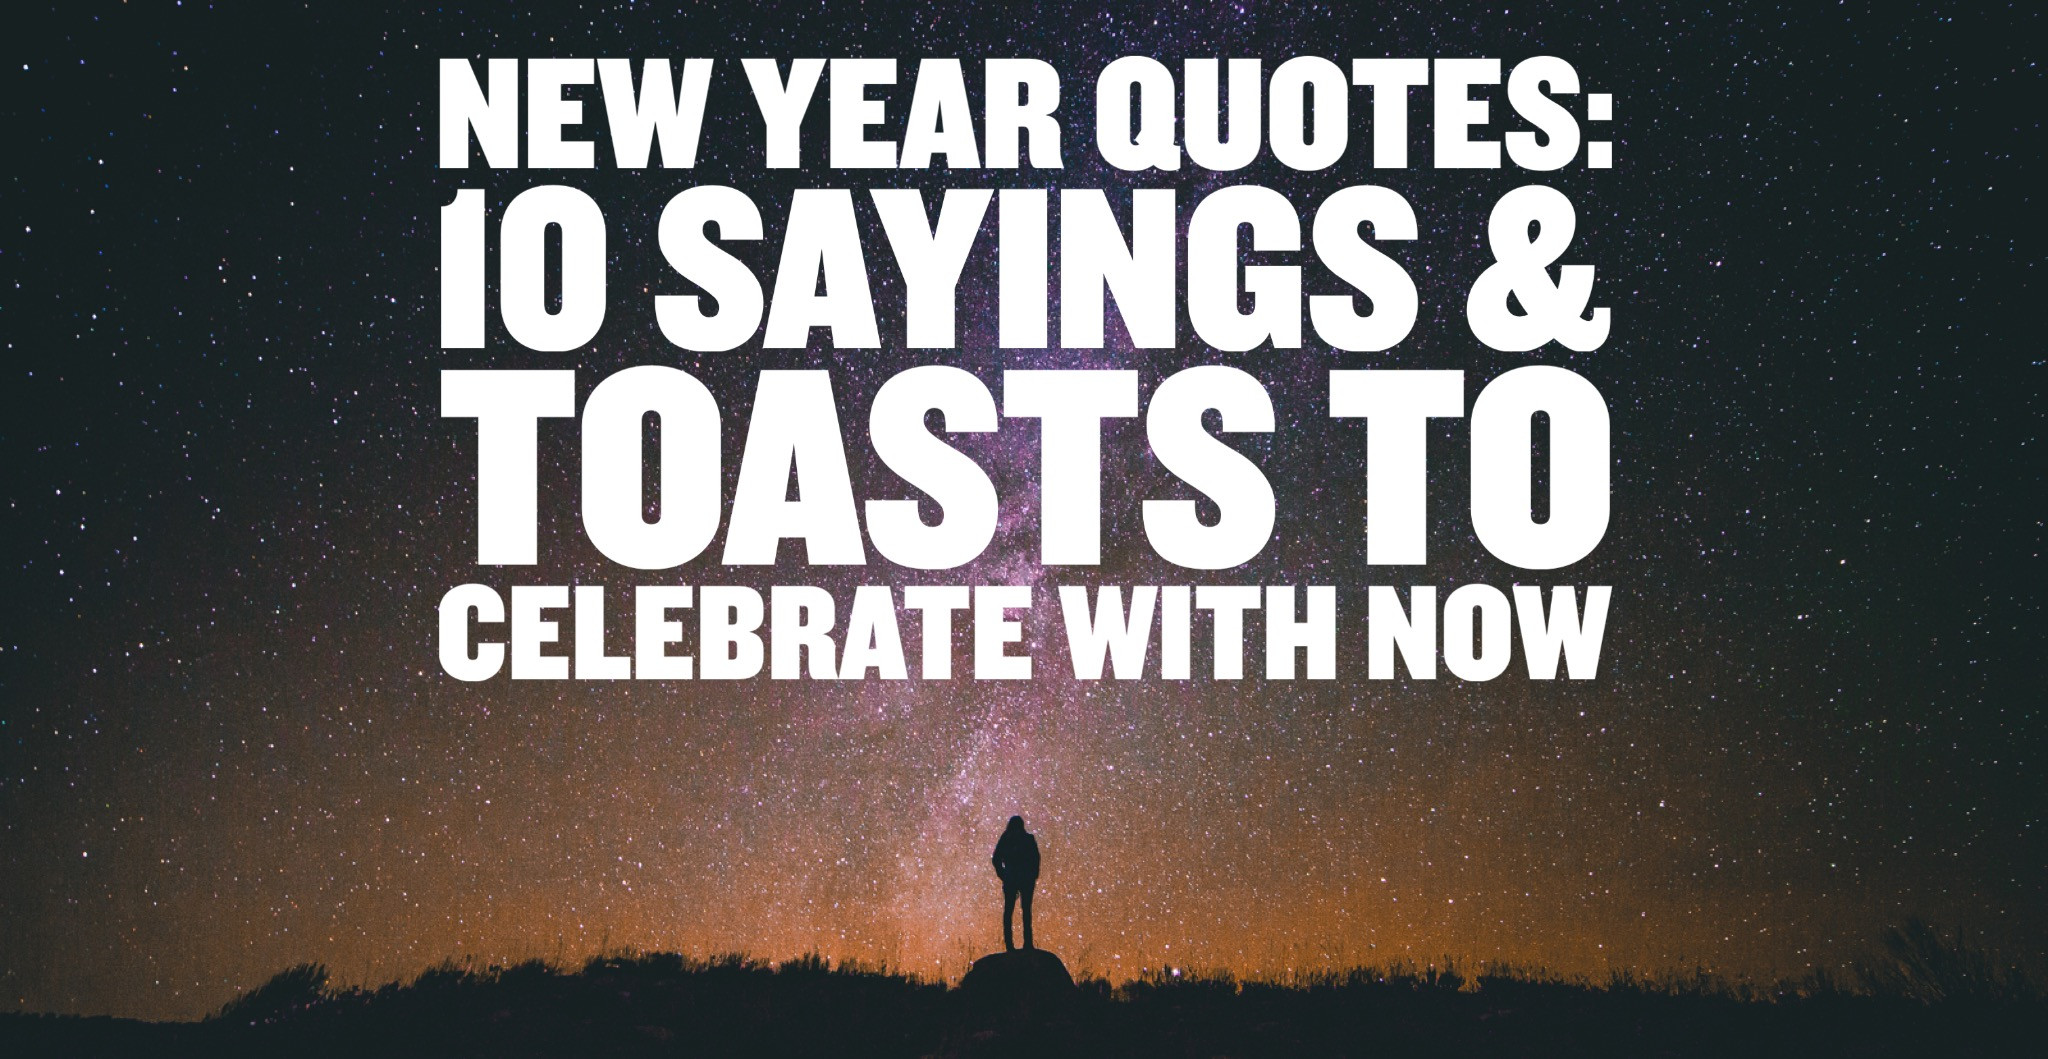 New Year Friendship Quotes
 New Year Quotes 10 Sayings & Toasts To Celebrate With